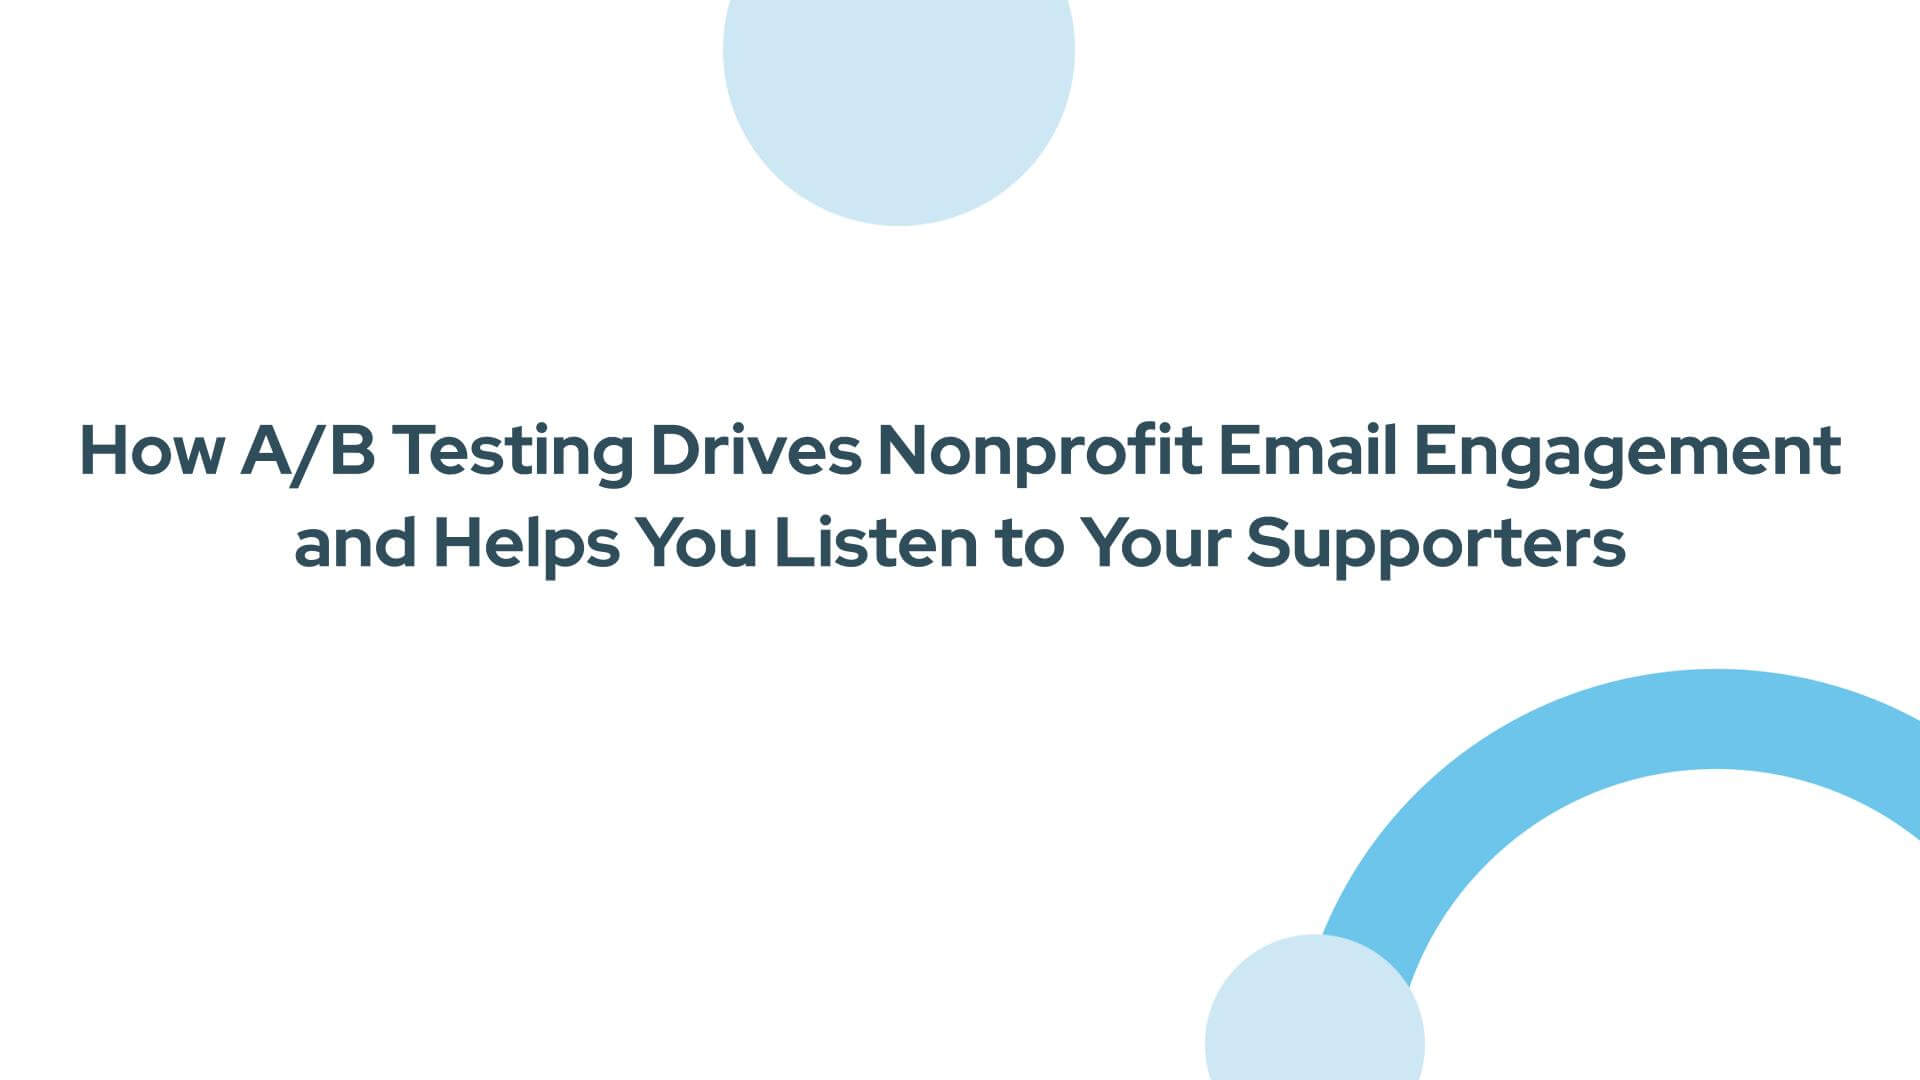 How A/B Testing Drives Nonprofit Email Engagement and Helps You Listen to Your Supporters